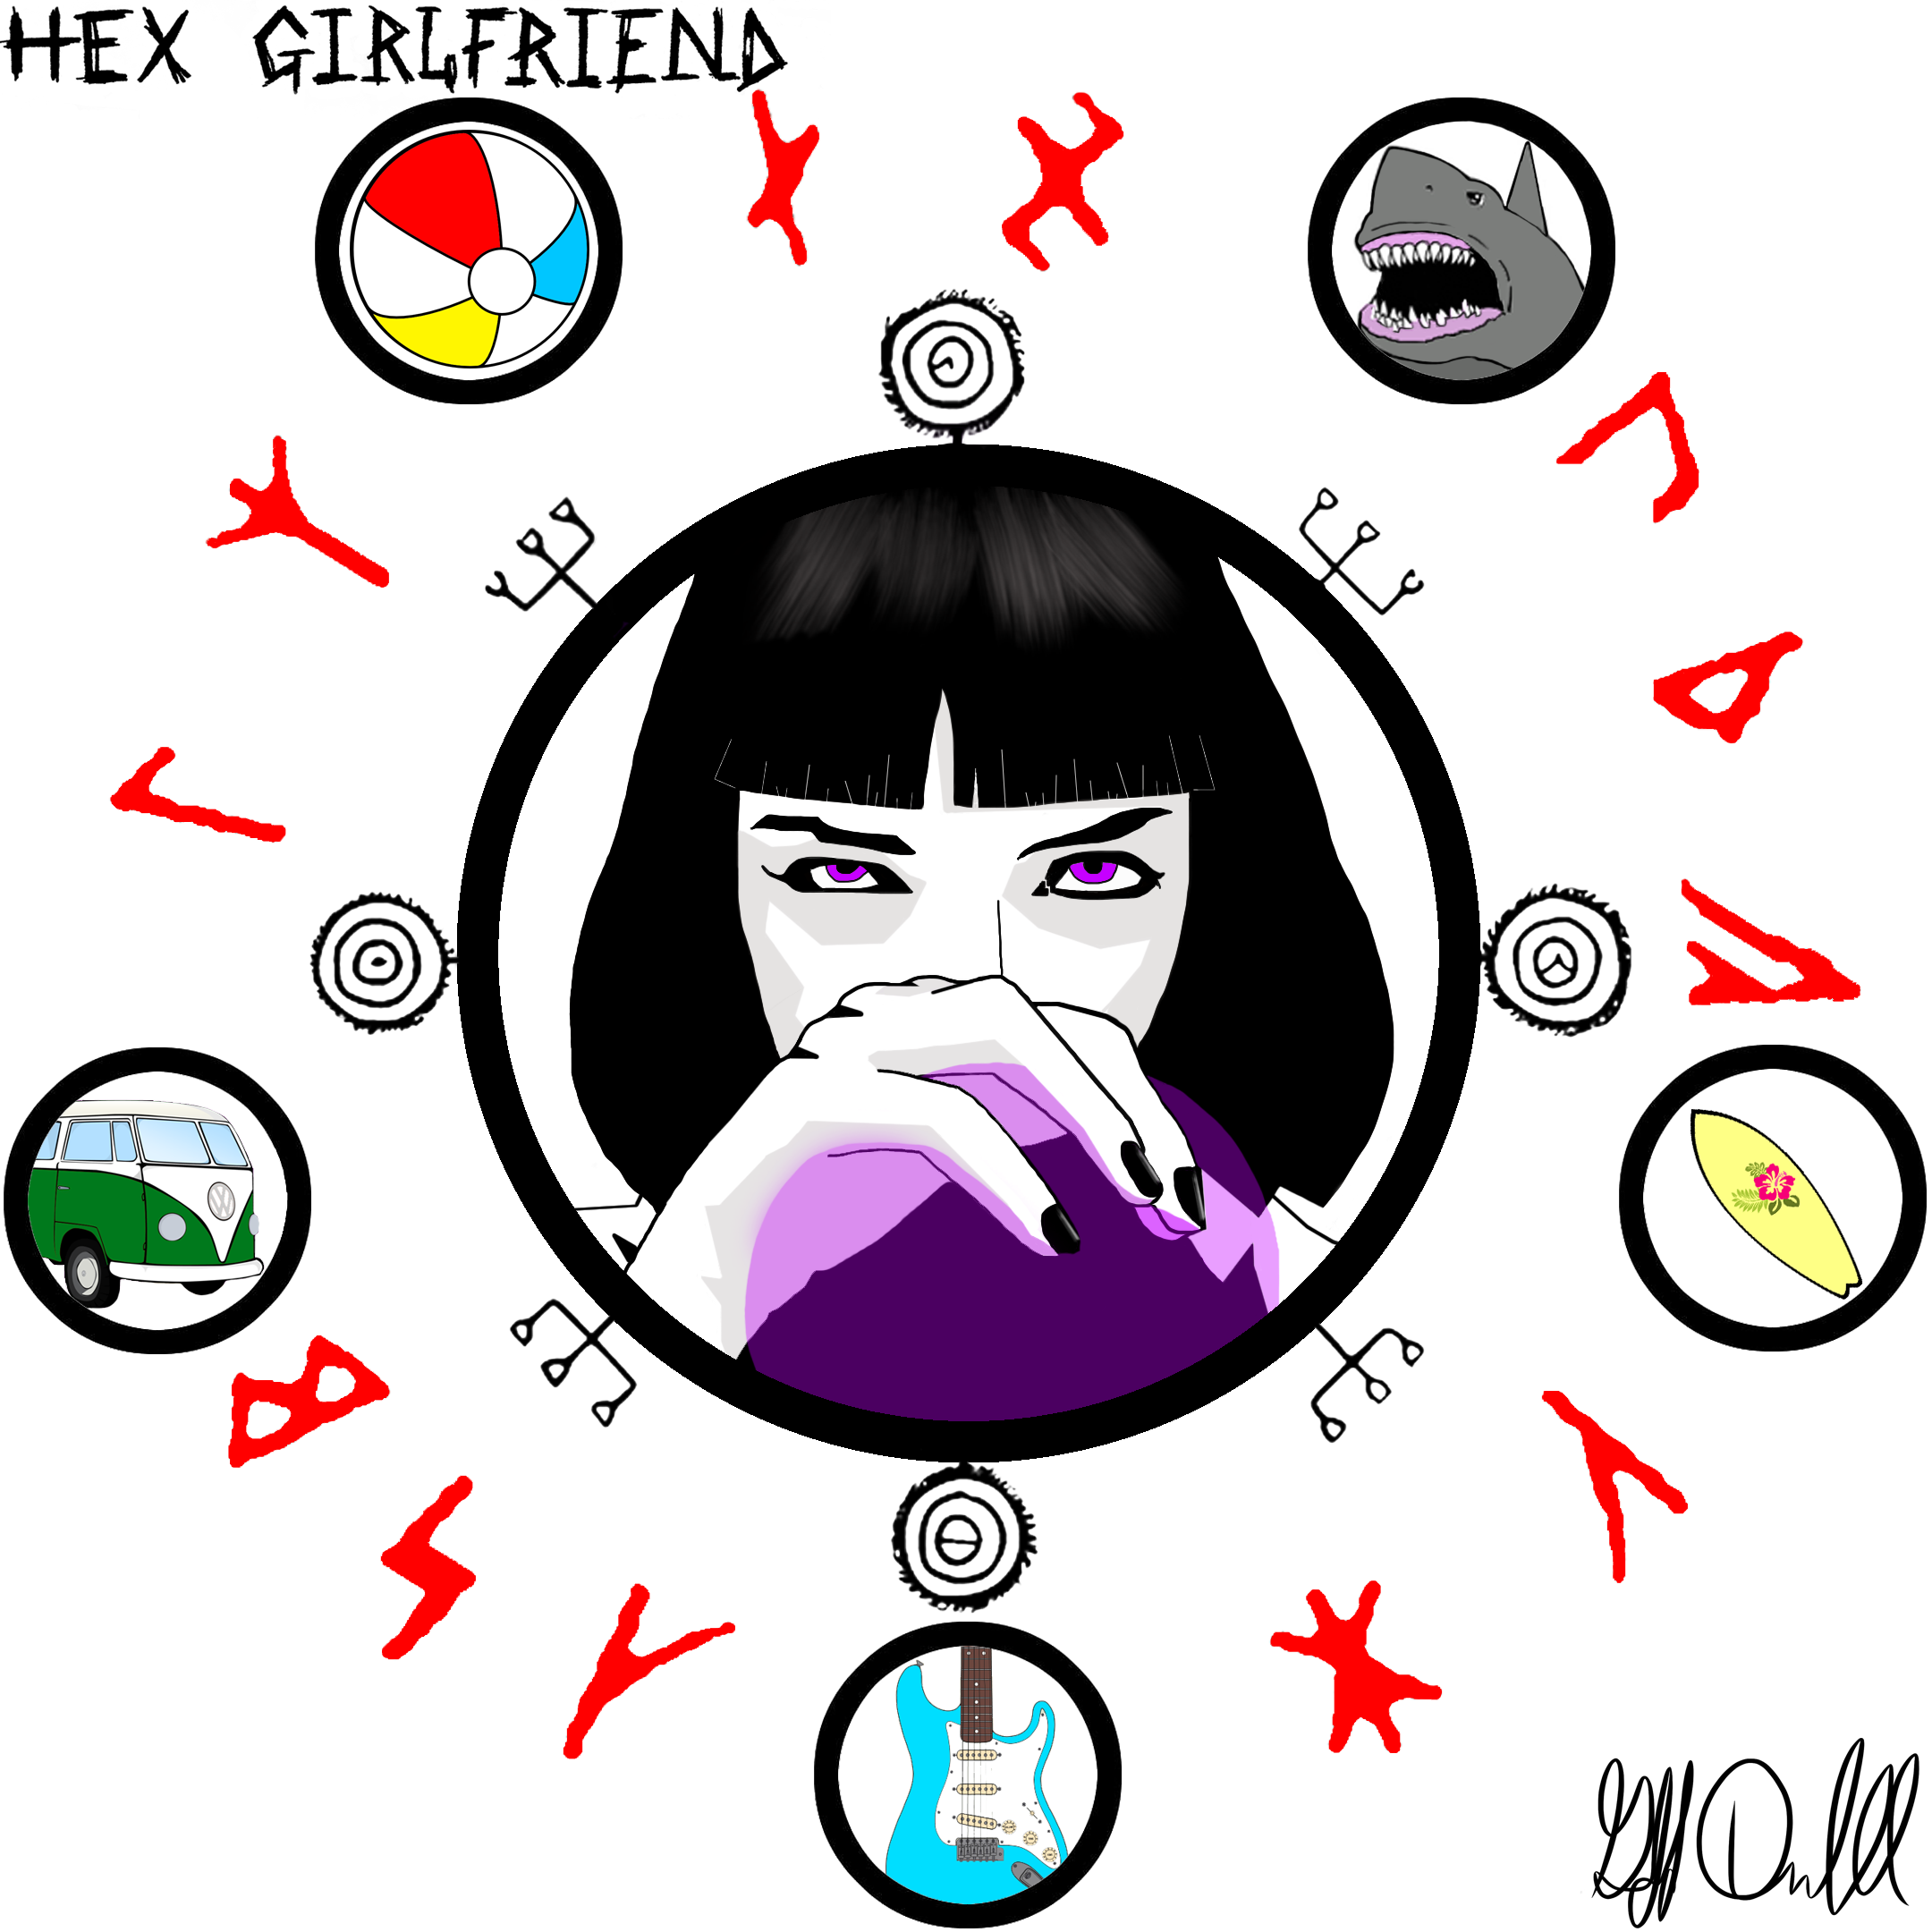 Hex Girlfriend EP Cover